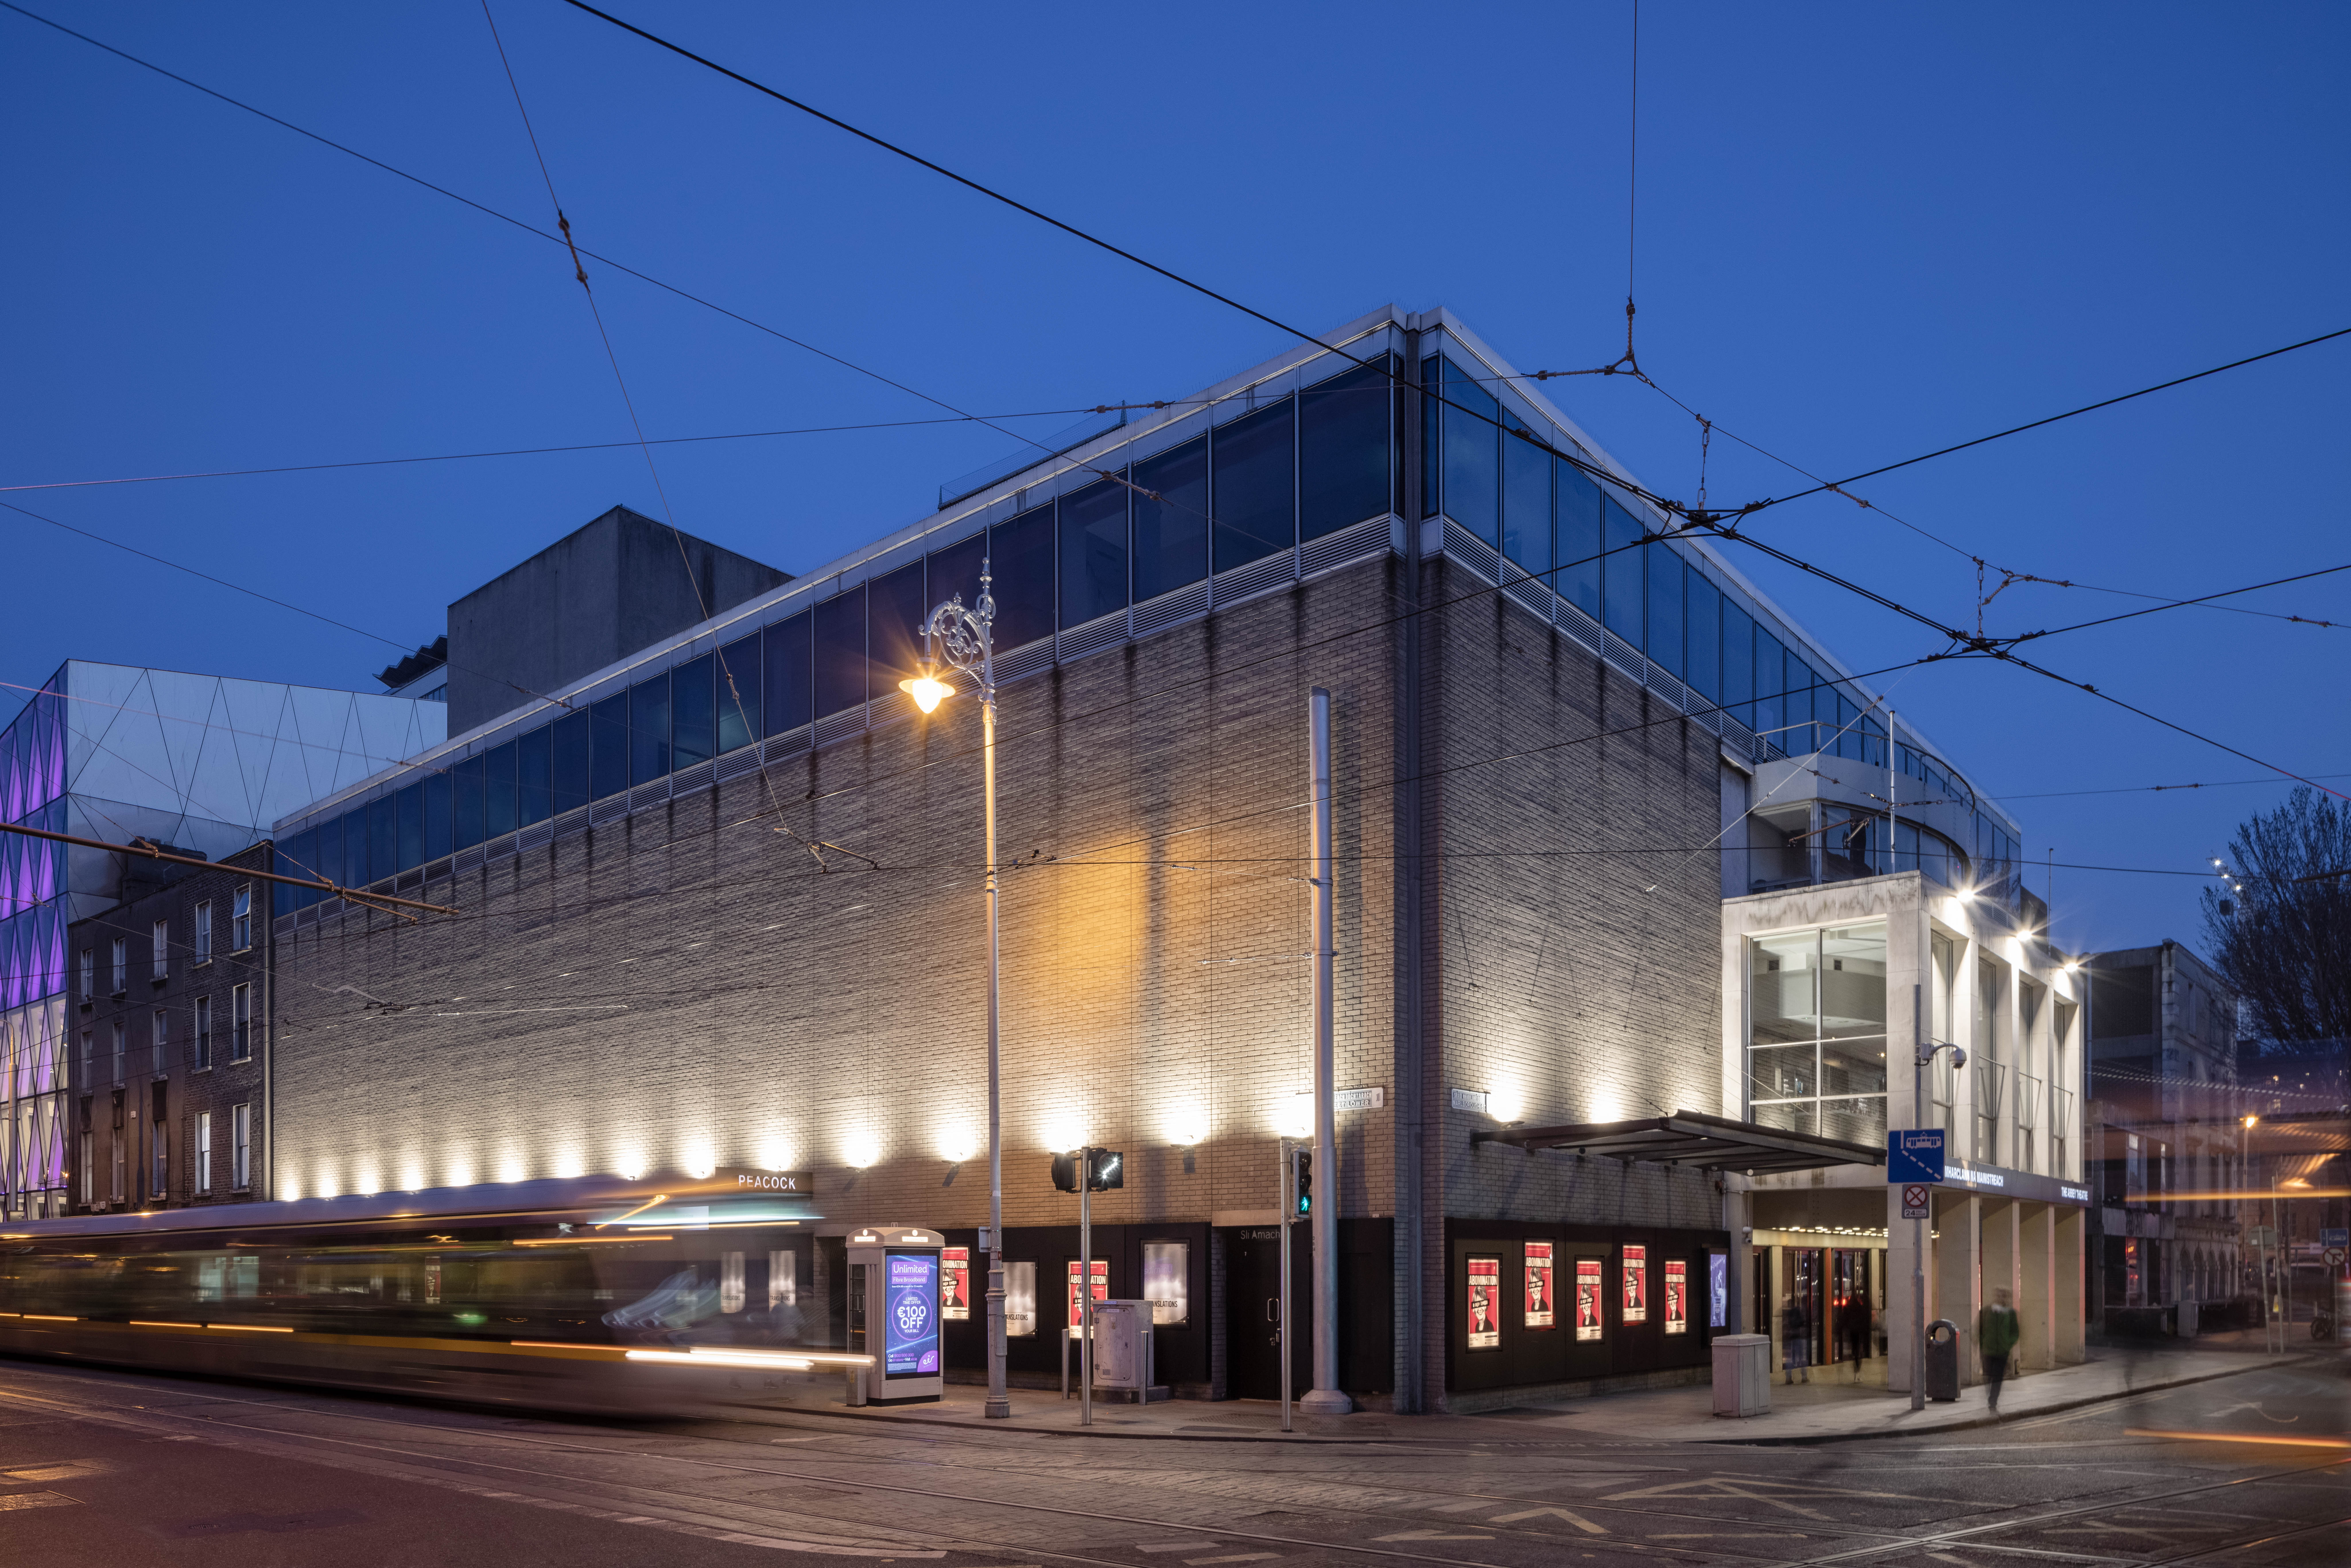 An external view of the Abbey Theatre. Photographed from across the street, it shows both the main entrance and glass portico on Marlborough Street, and the entrance to the Peacock Theatre on Abbey Street. The LUAS tram is passing by on Abbey Street, and the image is taken at dusk.